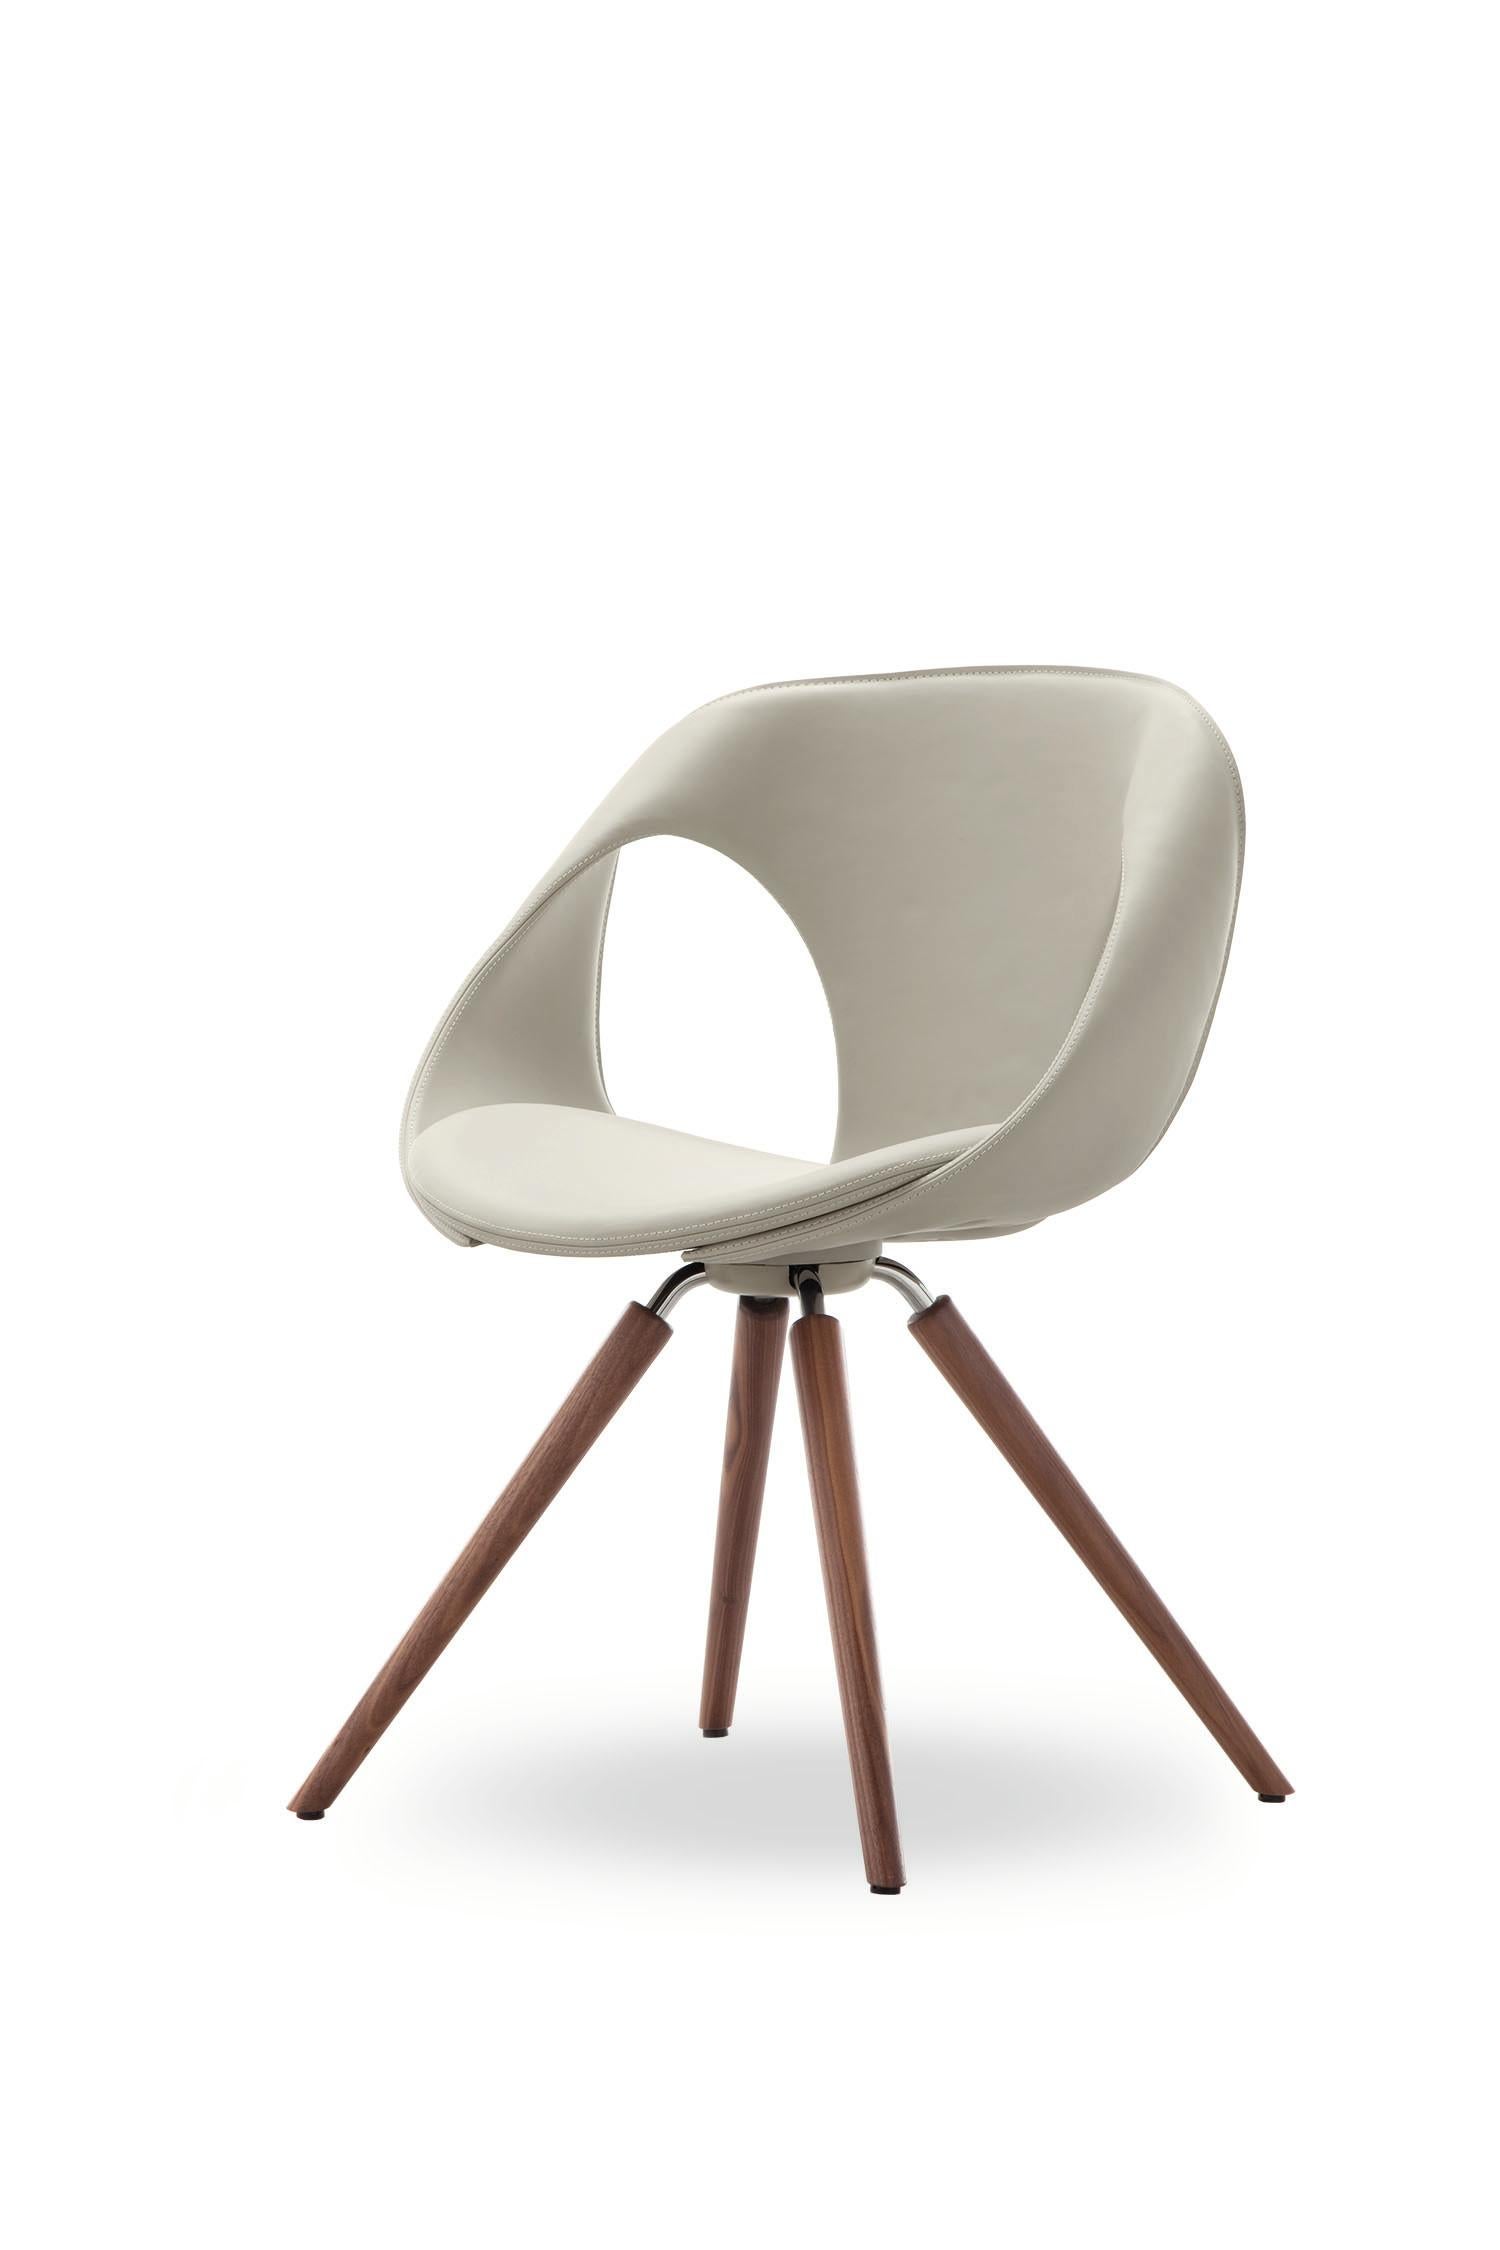 The Up chair with unique flowing wood arms by Tonon is an highly chair. For this version of the popular Up chair you can choose between wood legs and arms in either oak or walnut. 
The seat of the chair is upholstered in soft Italian leather in